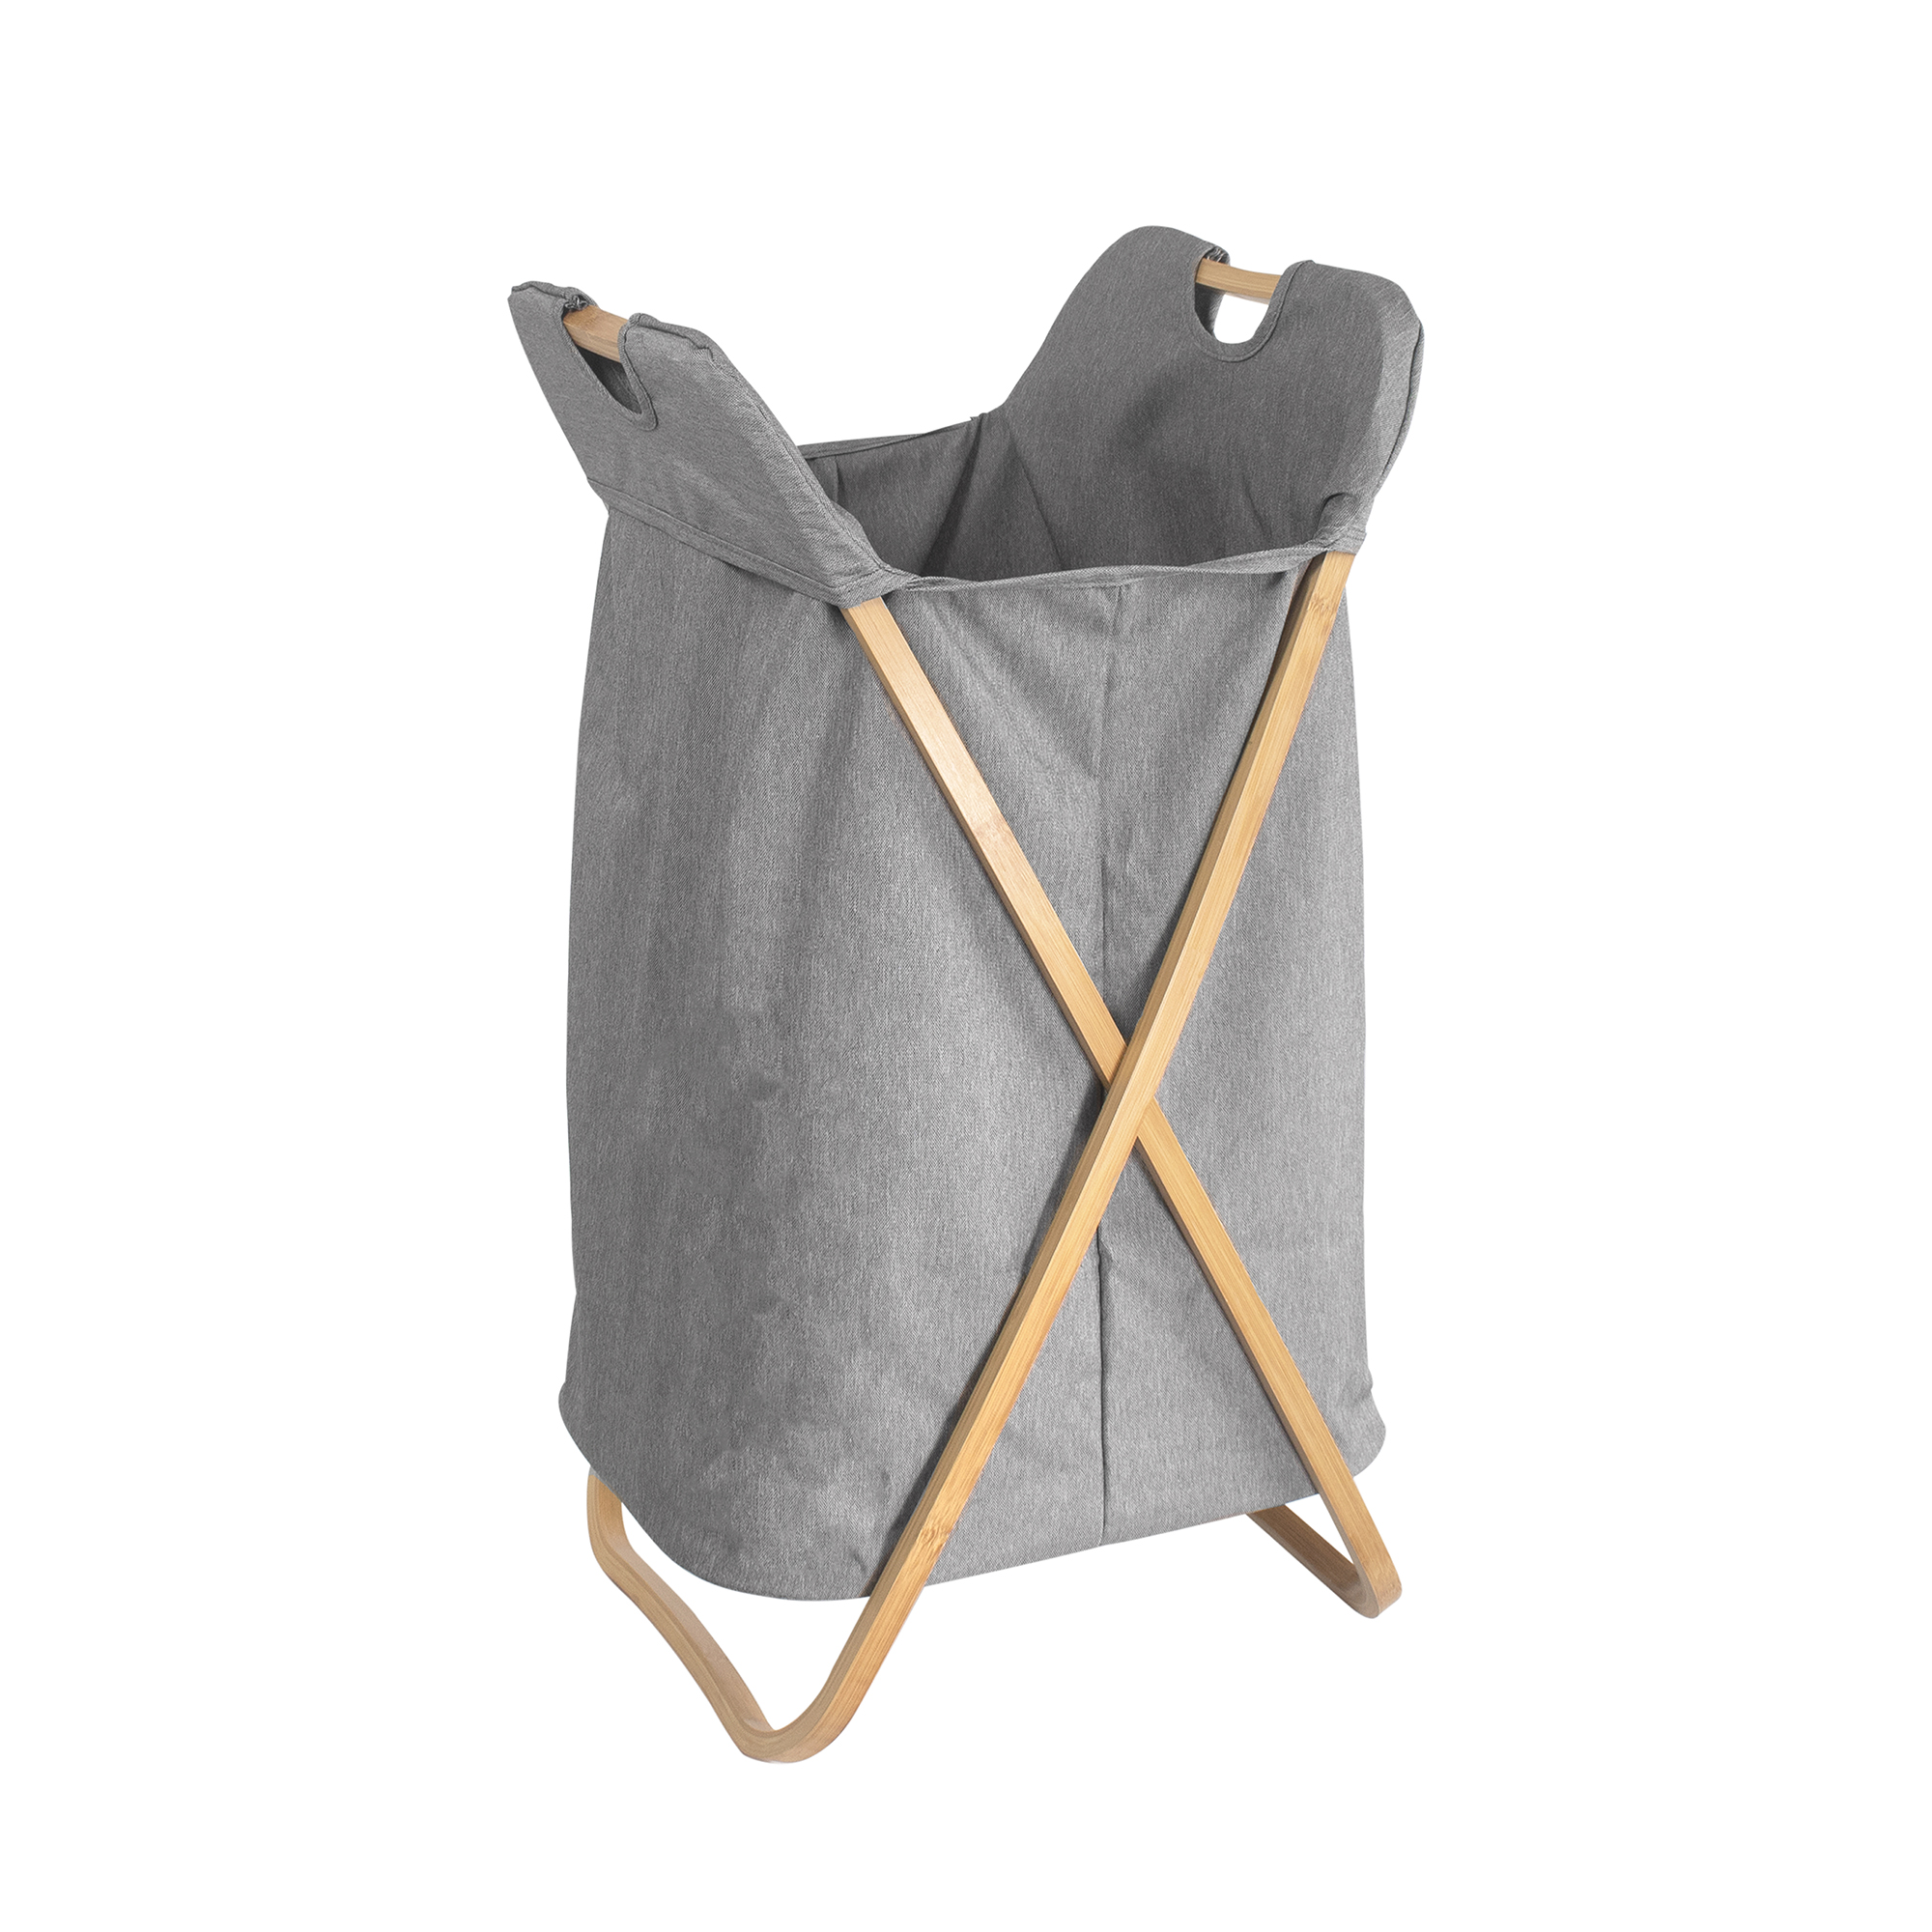 Bamboo Laundry Basket with Handles